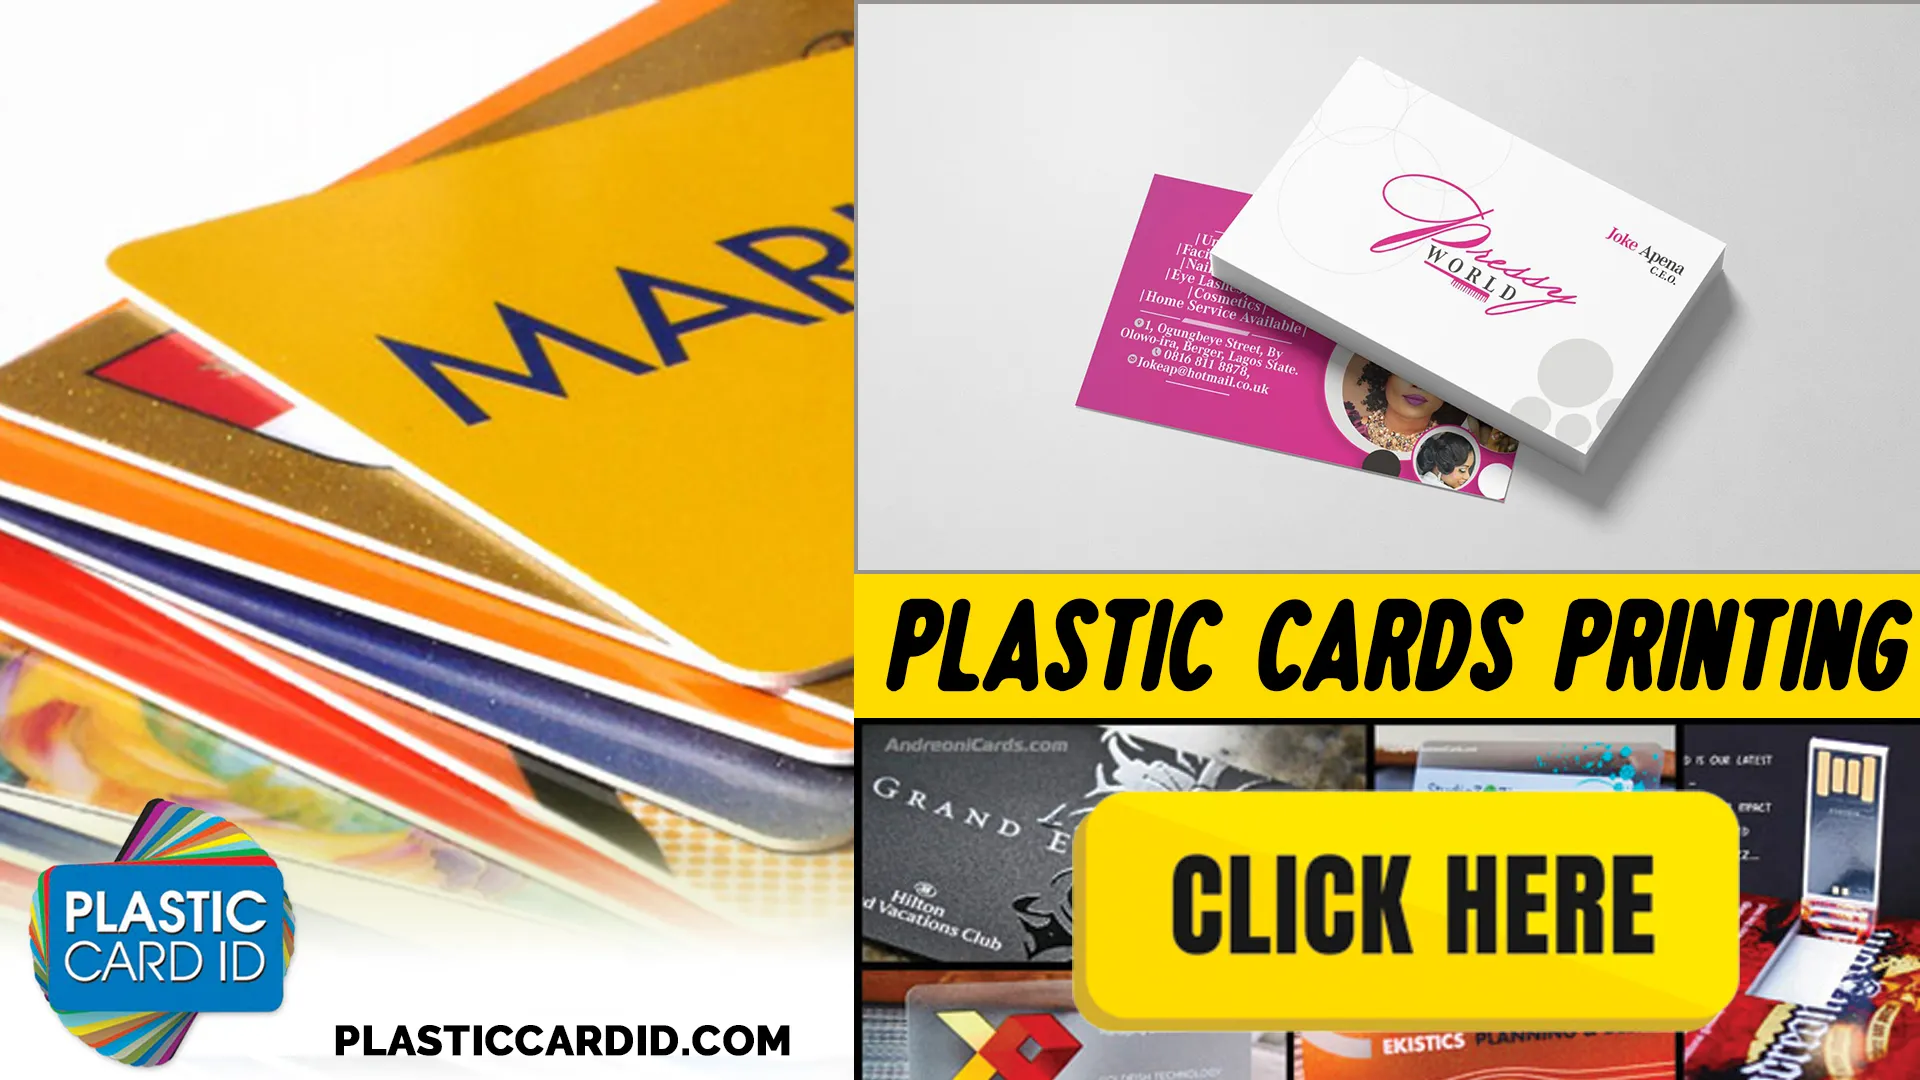 Plastic Card ID
: Where Advanced Tech Meets Uncompromised Privacy